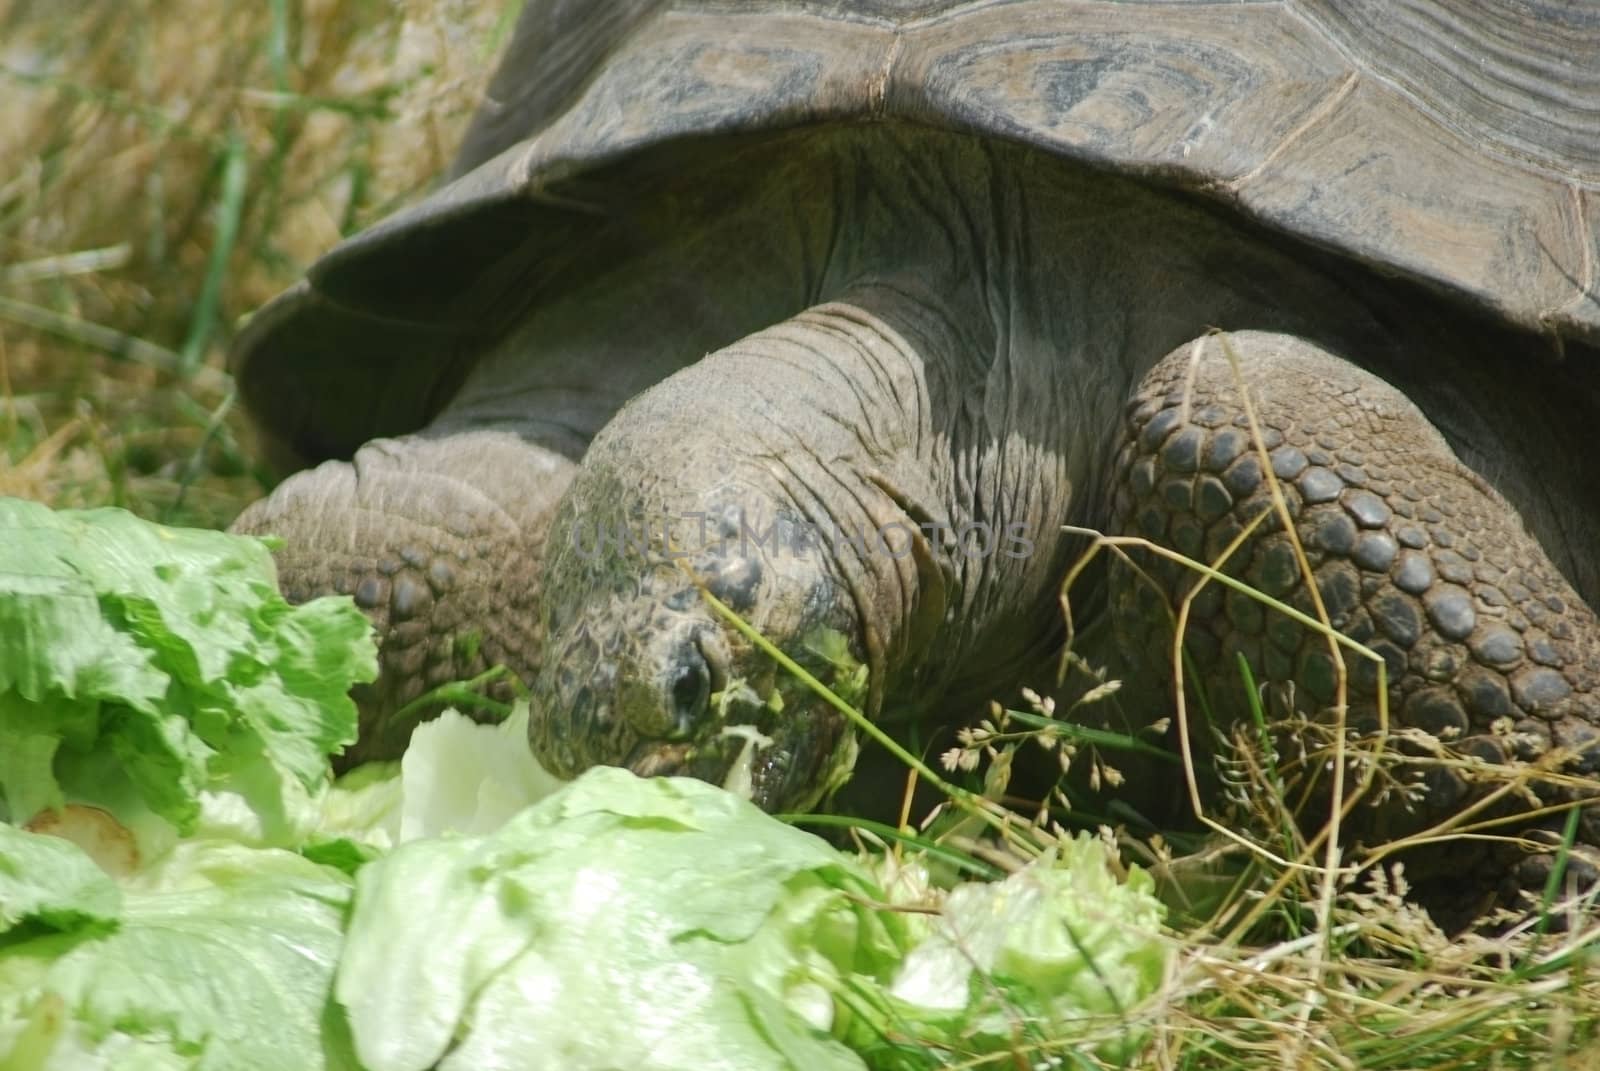 Big Seychelles turtle eating, Giant tortoise close up by svtrotof